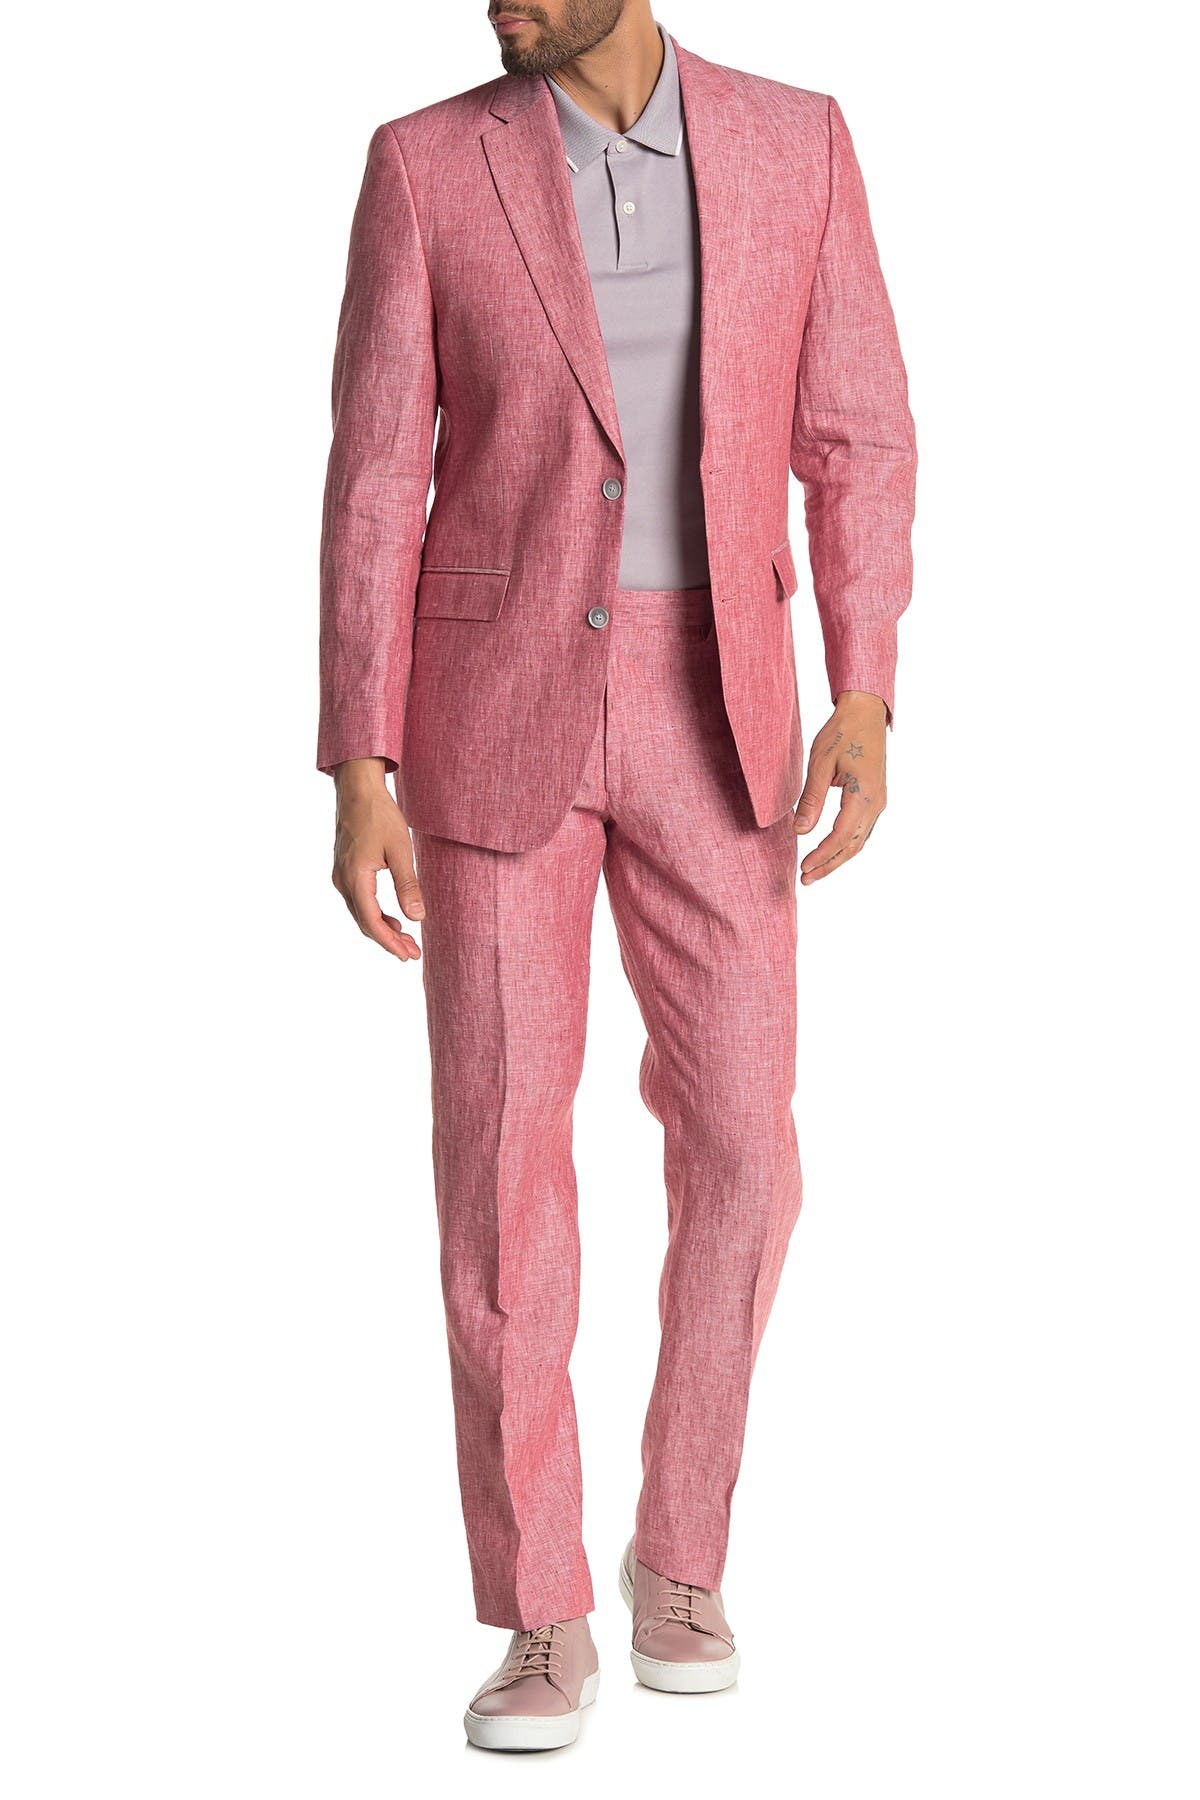 Salmon Solid Two Button Notch Lapel 